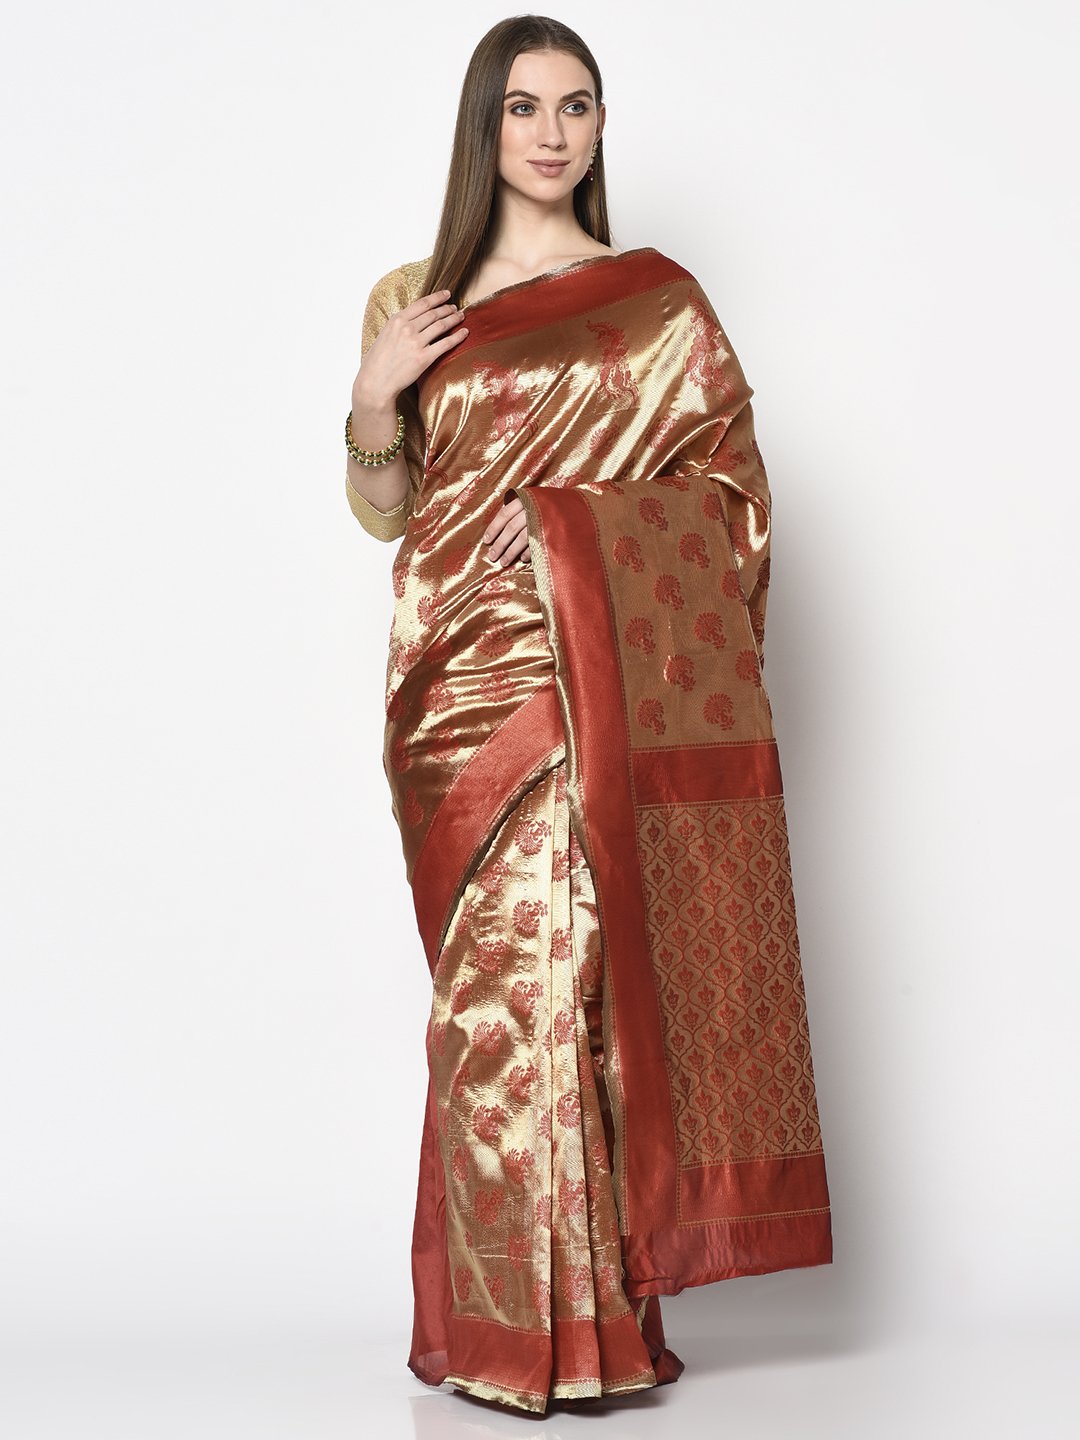 Shop Handloom Saree In Golden&Red Colour which is Saree online at simaaya At